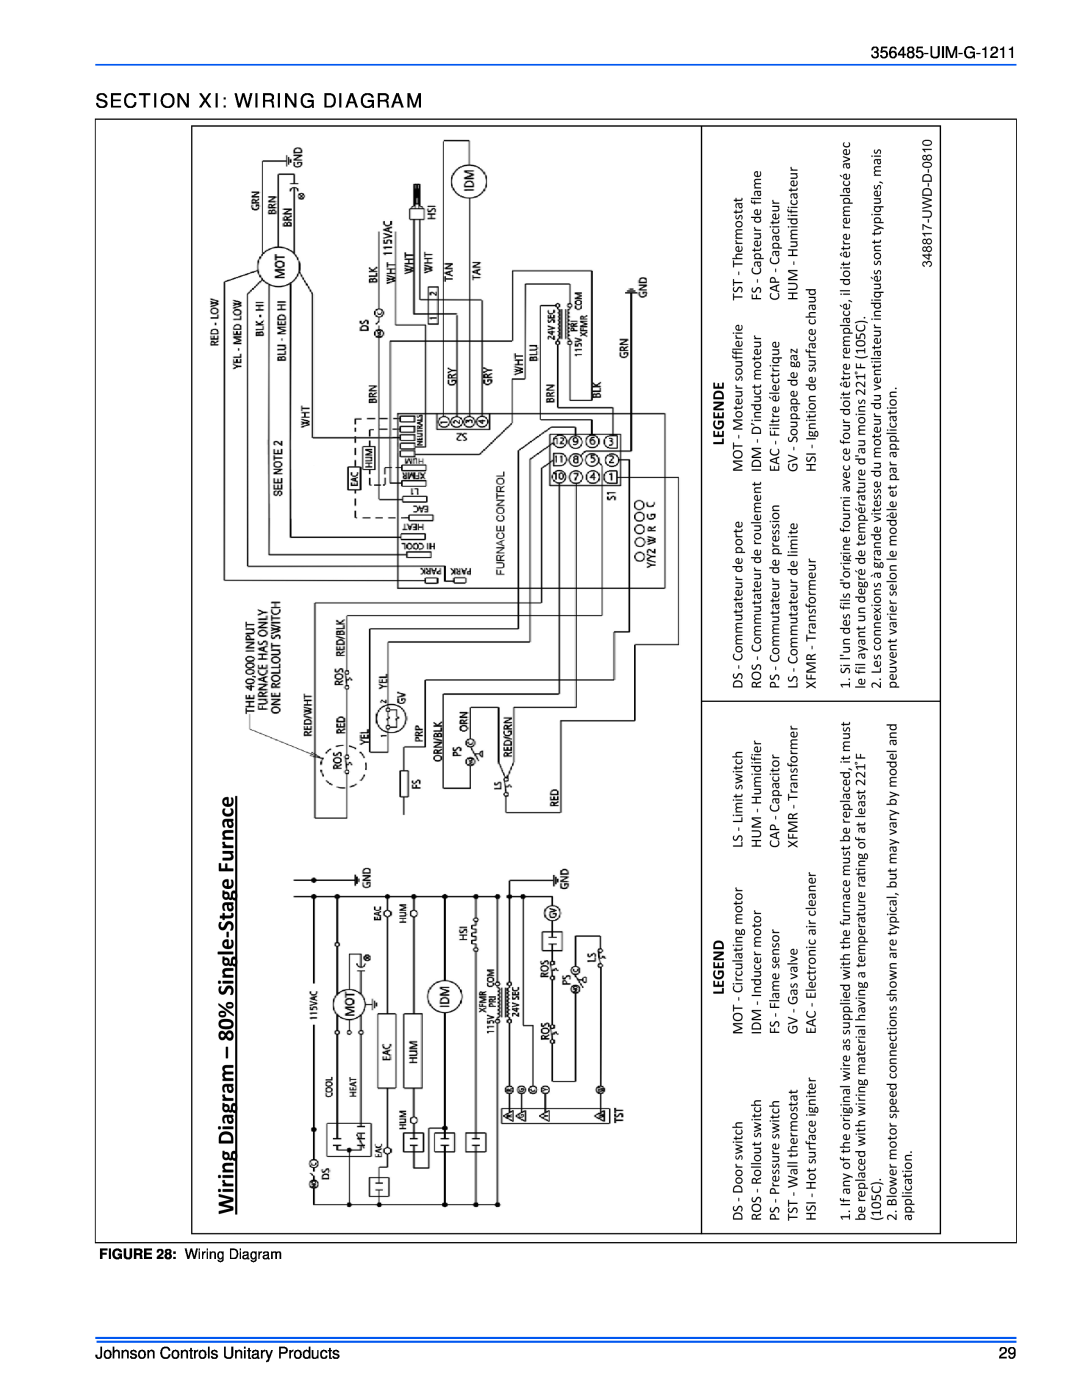 Johnson Controls TG8S*MP Section Xi Wiring Diagram, Wiring –, Legende, Johnson Controls Unitary Products, UIM-G-1211 